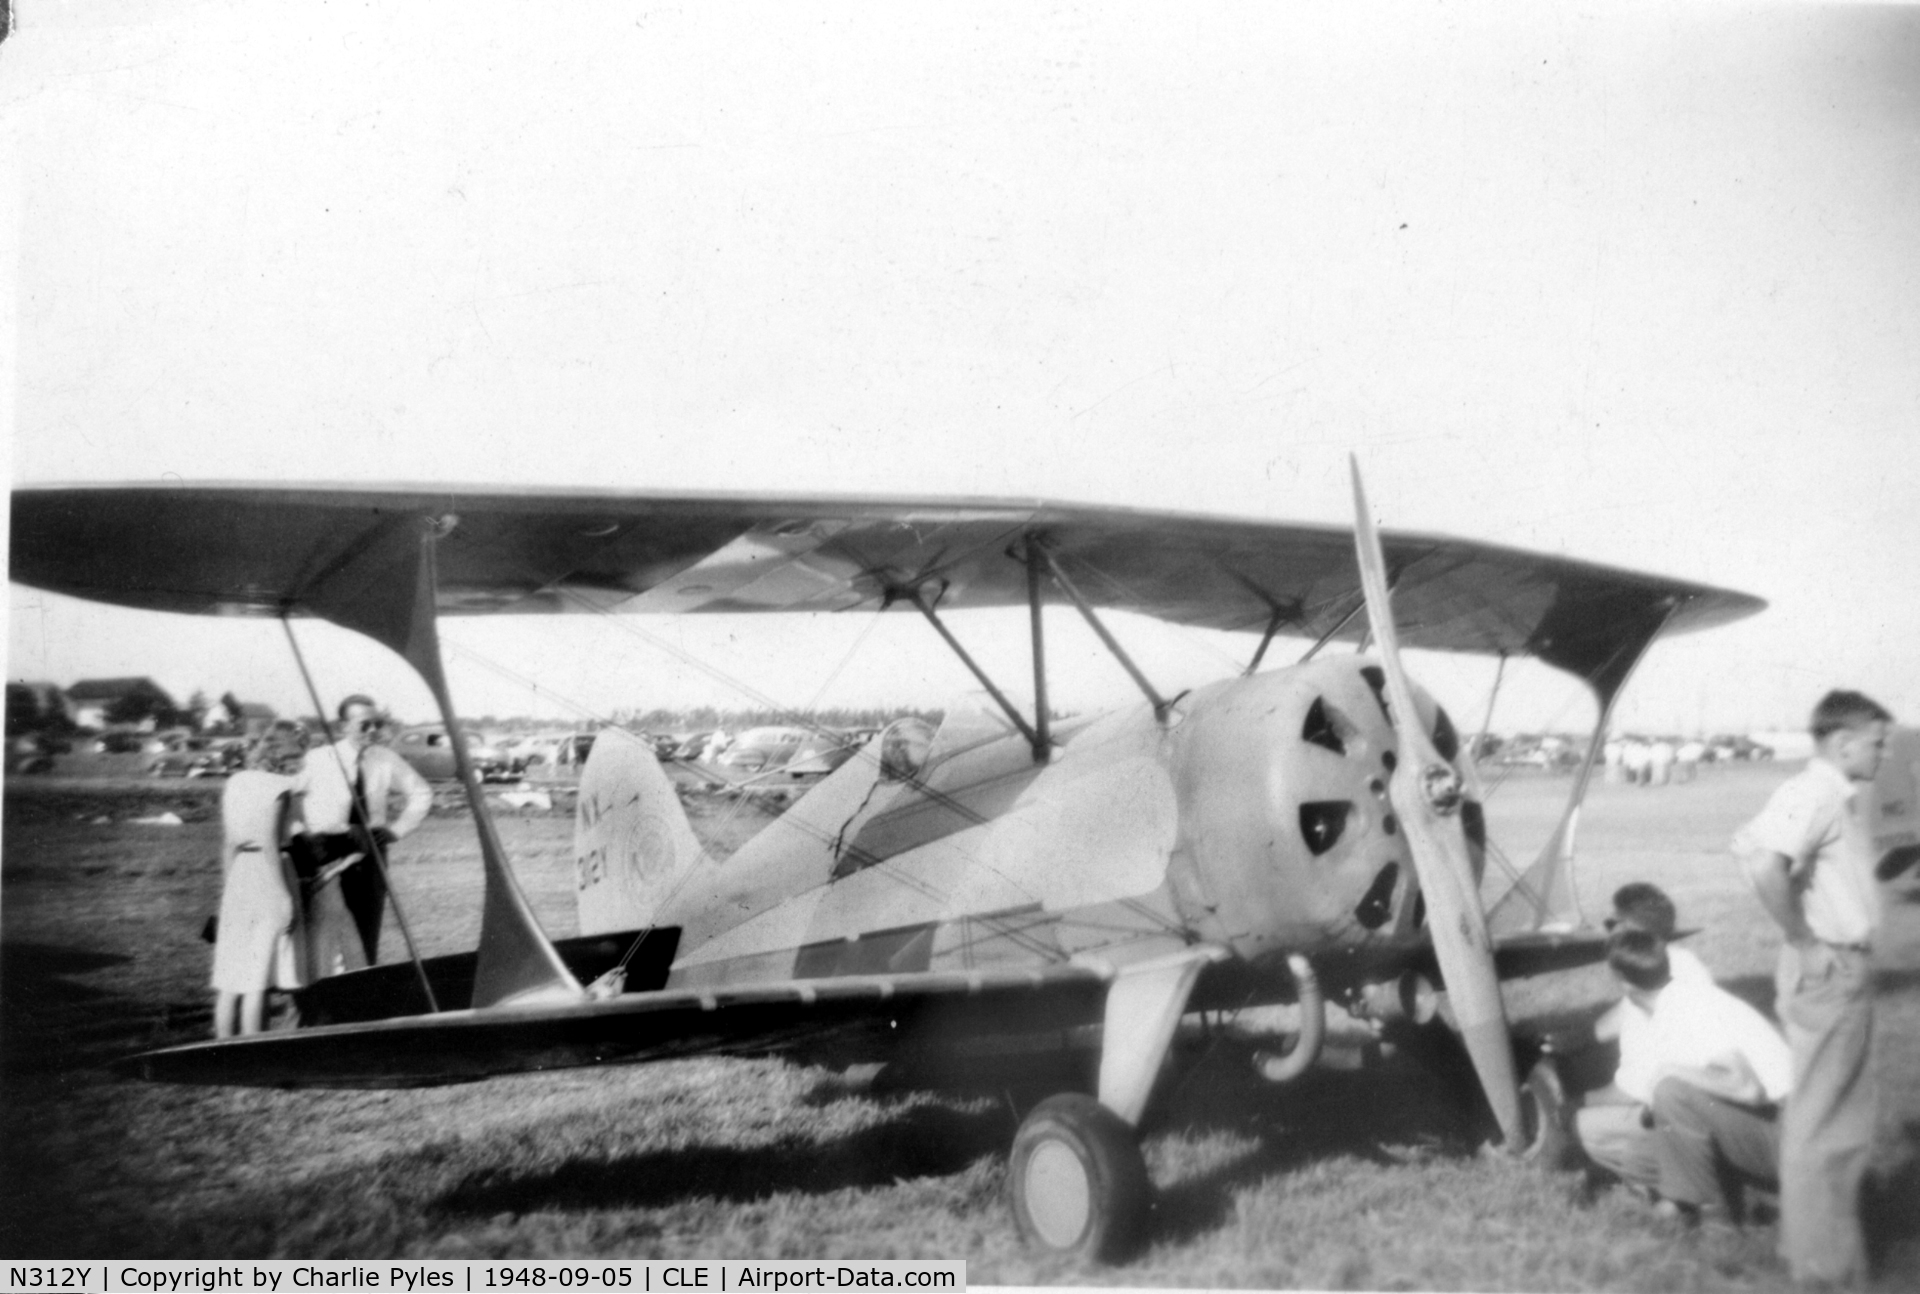 N312Y, 1929 Great Lakes 2T-1A Sport Trainer C/N 199, At the National Air Races 1948. Shot by my friend Lou Miller R.I.P. whose various photos are now in my possession and collection.